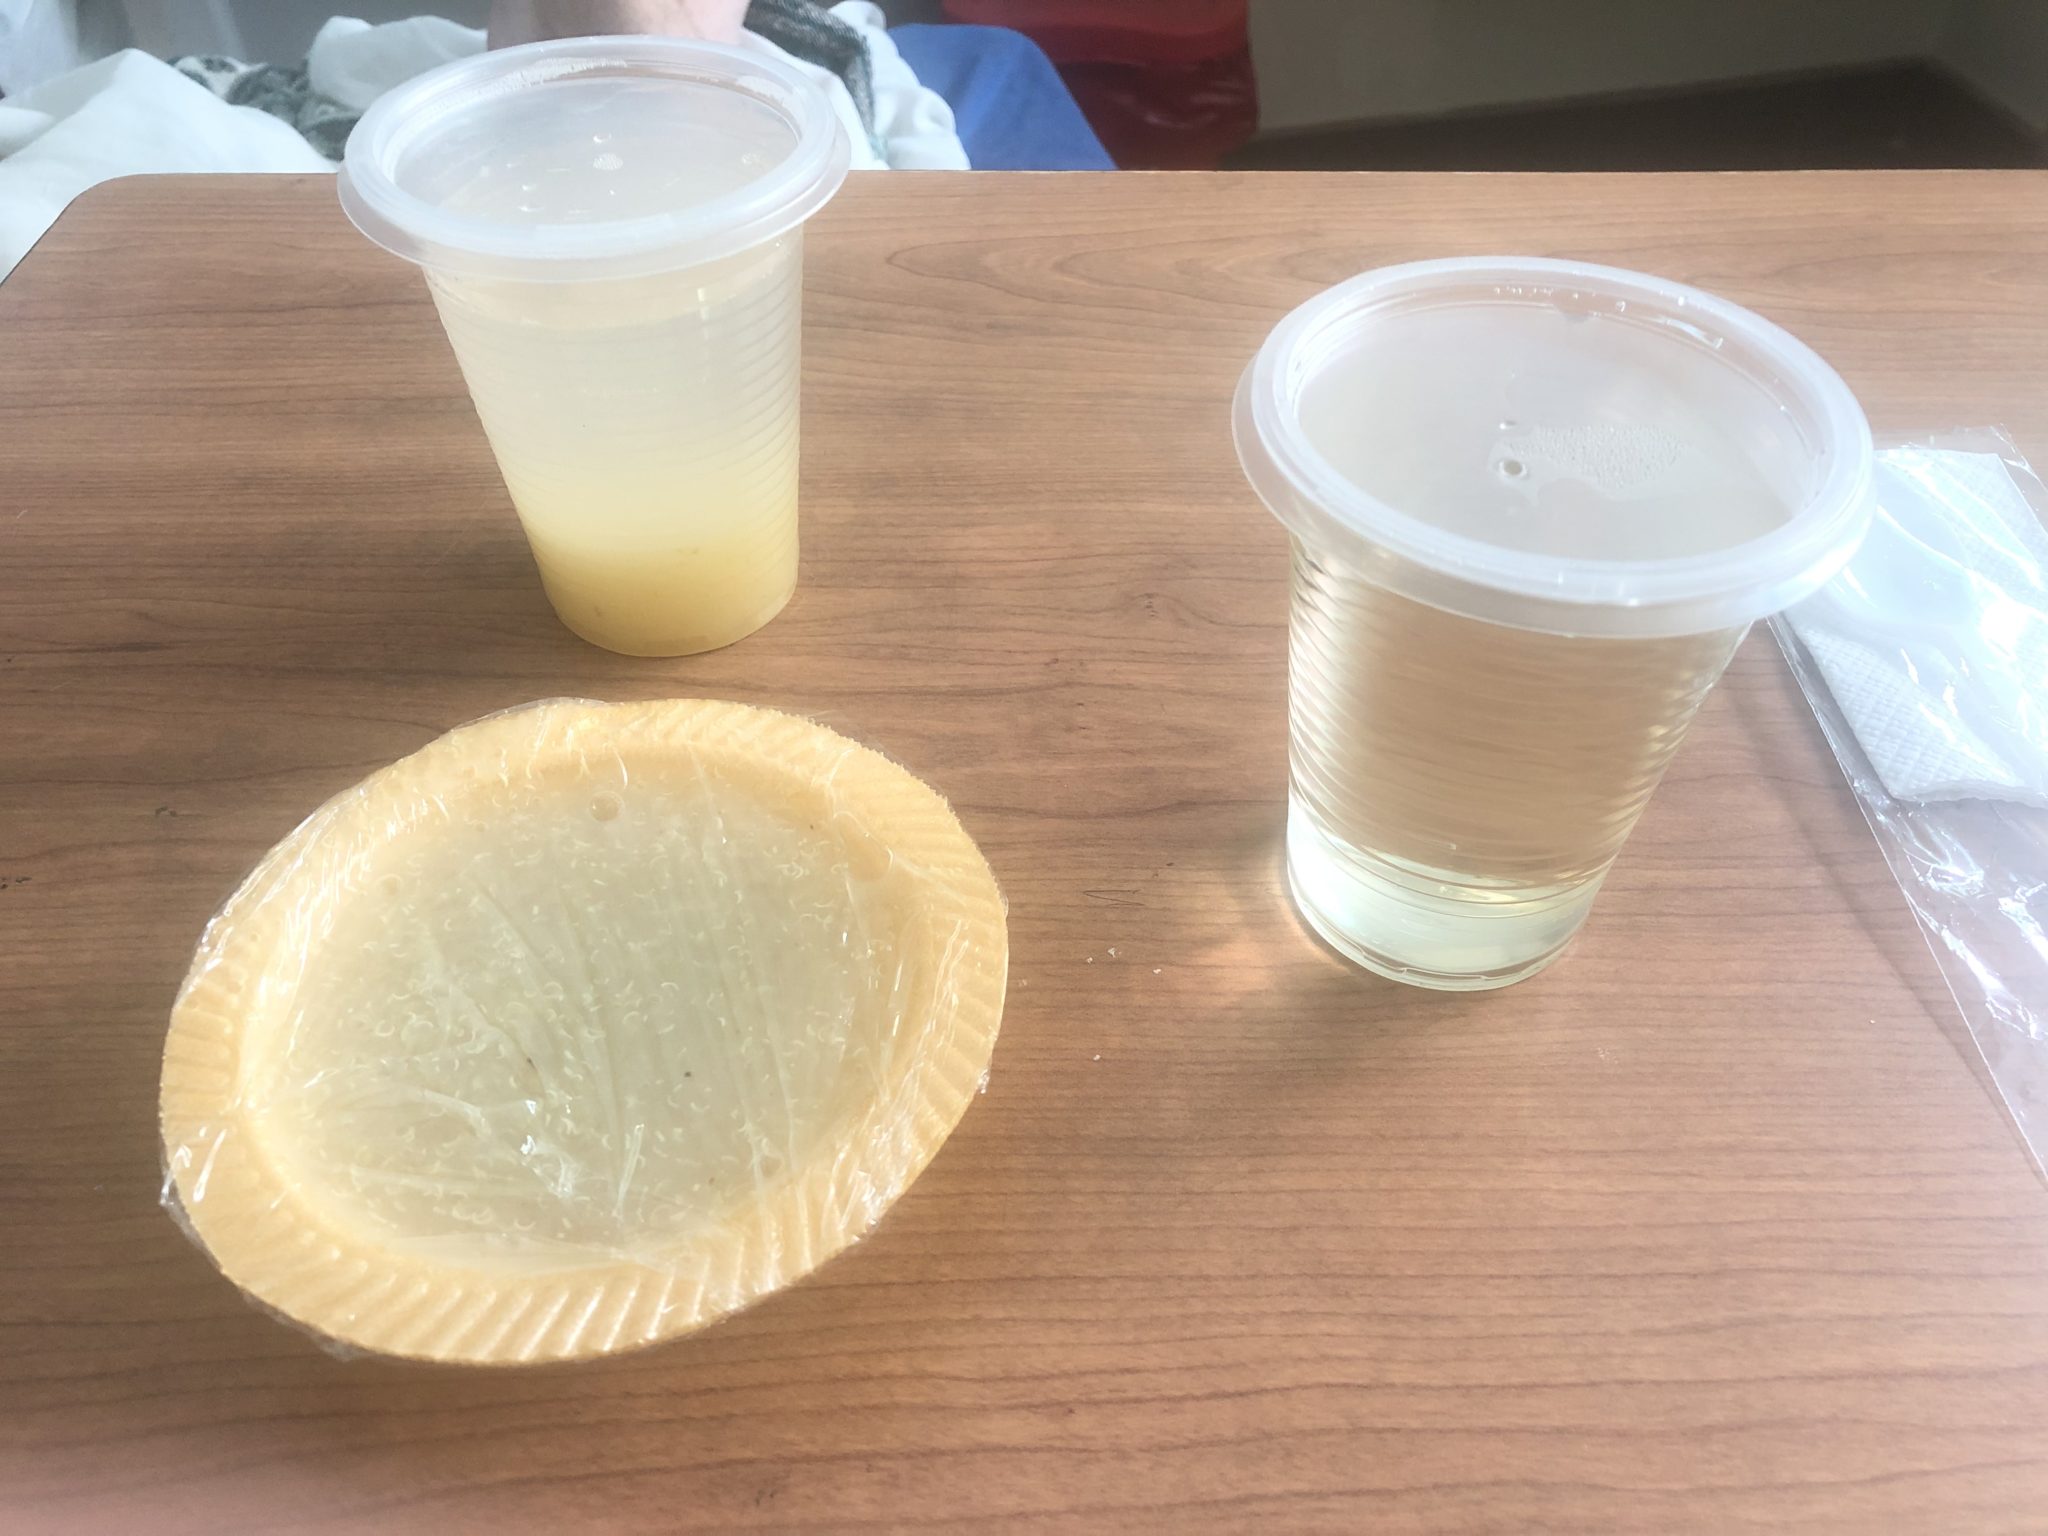 A photo of the breakfast the the author was served while waiting for a coronavirus test in Ecuador's public hospital system.